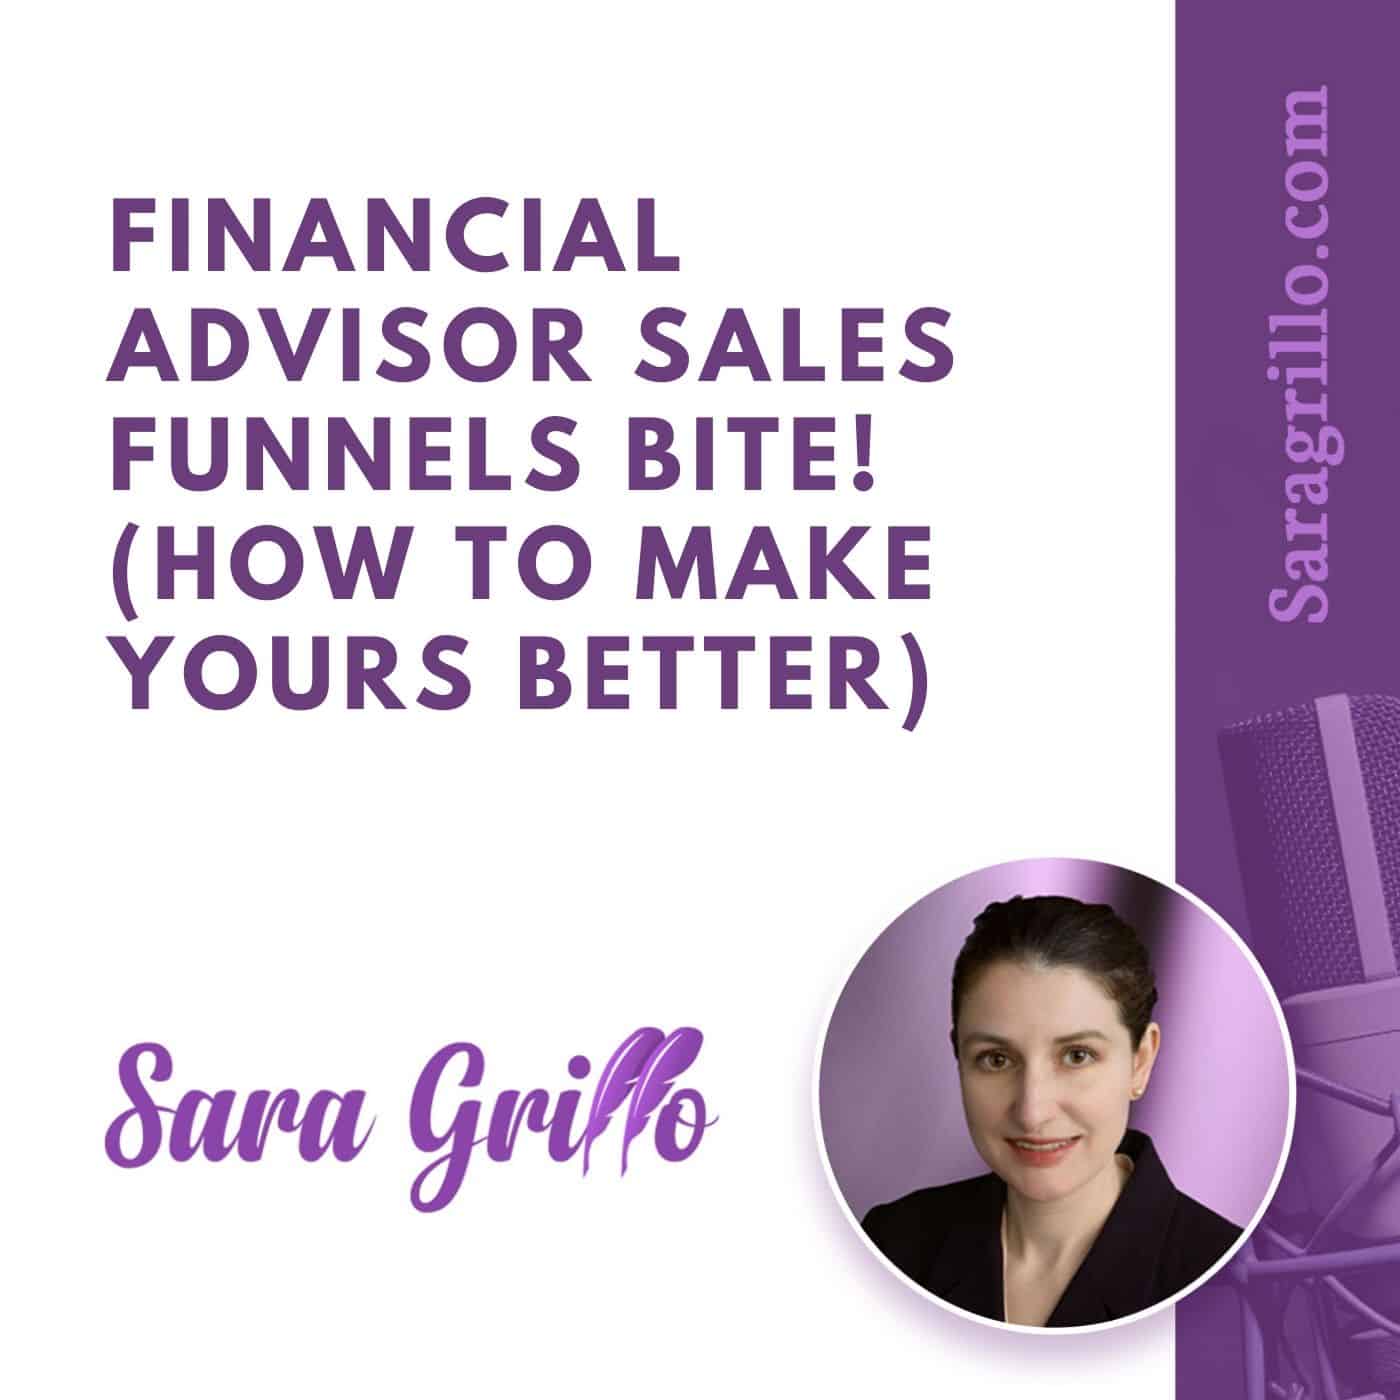 In this podcast/blog you will learn why financial advisor sales funnels bite and what you can do to improve yours.